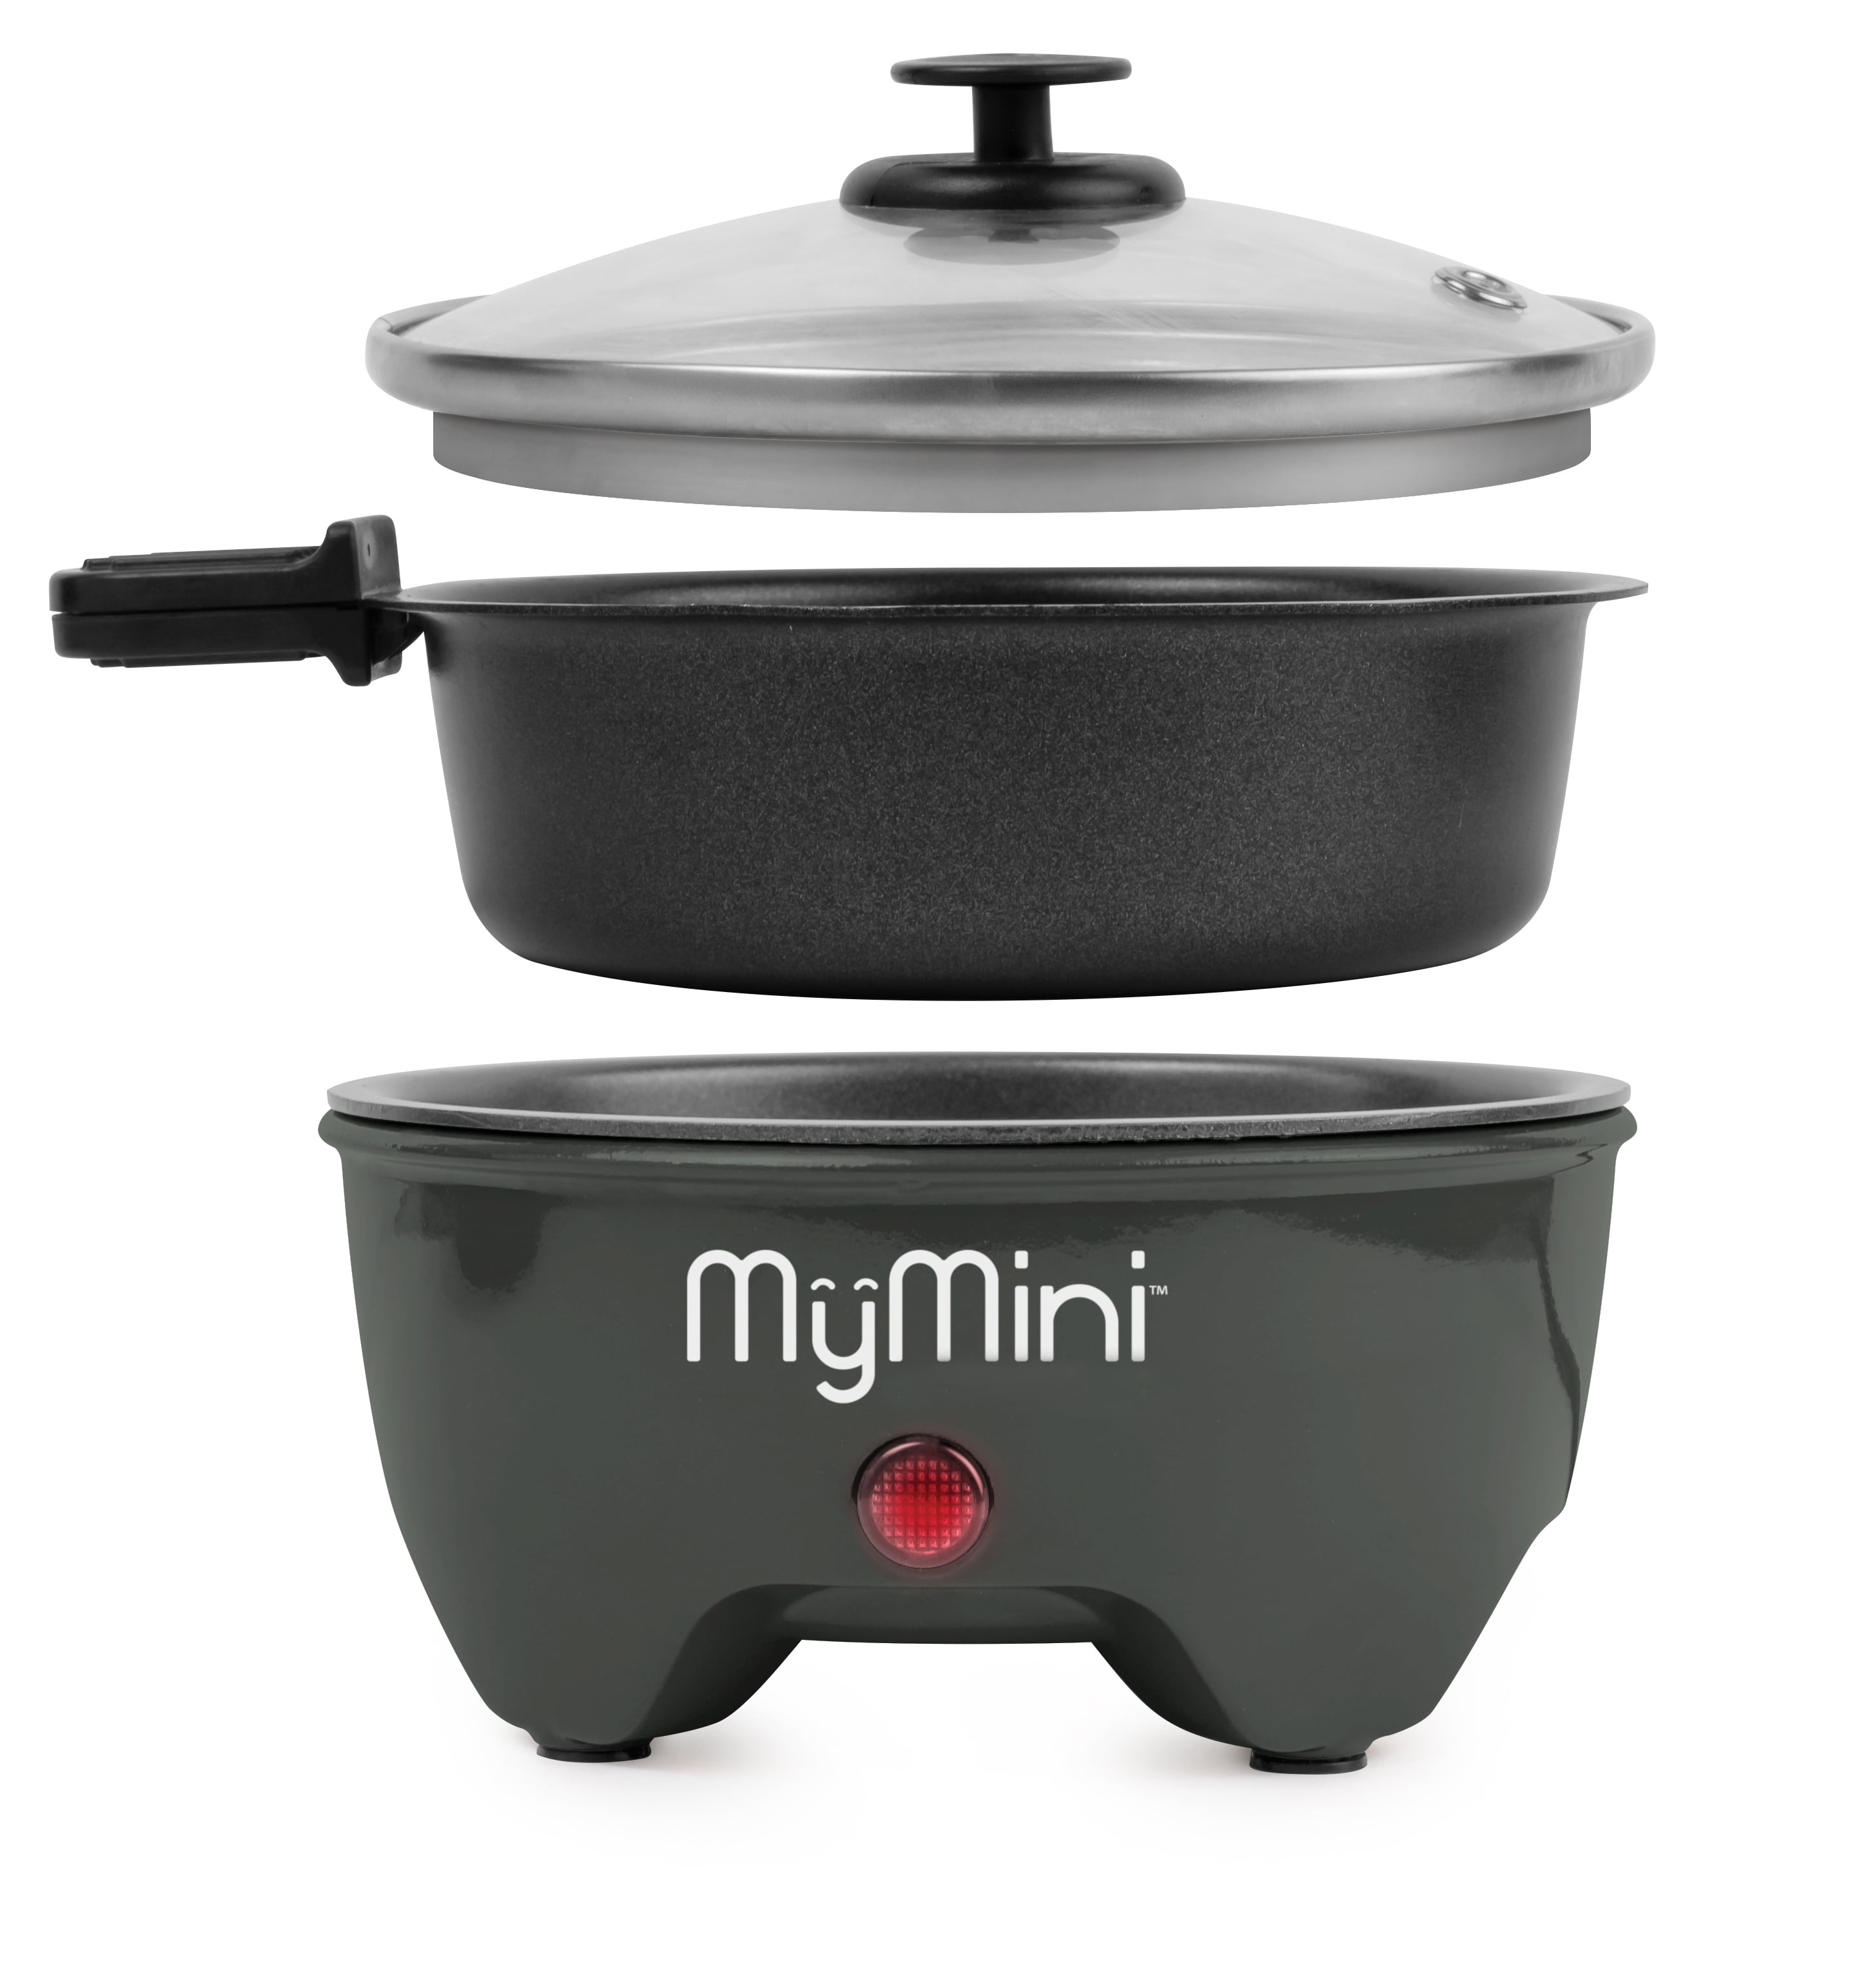 5" Mymini Noodle Cooker & Skillet Electric Hot Pot $9 + Free Shipping w/ Walmart+ or $35+